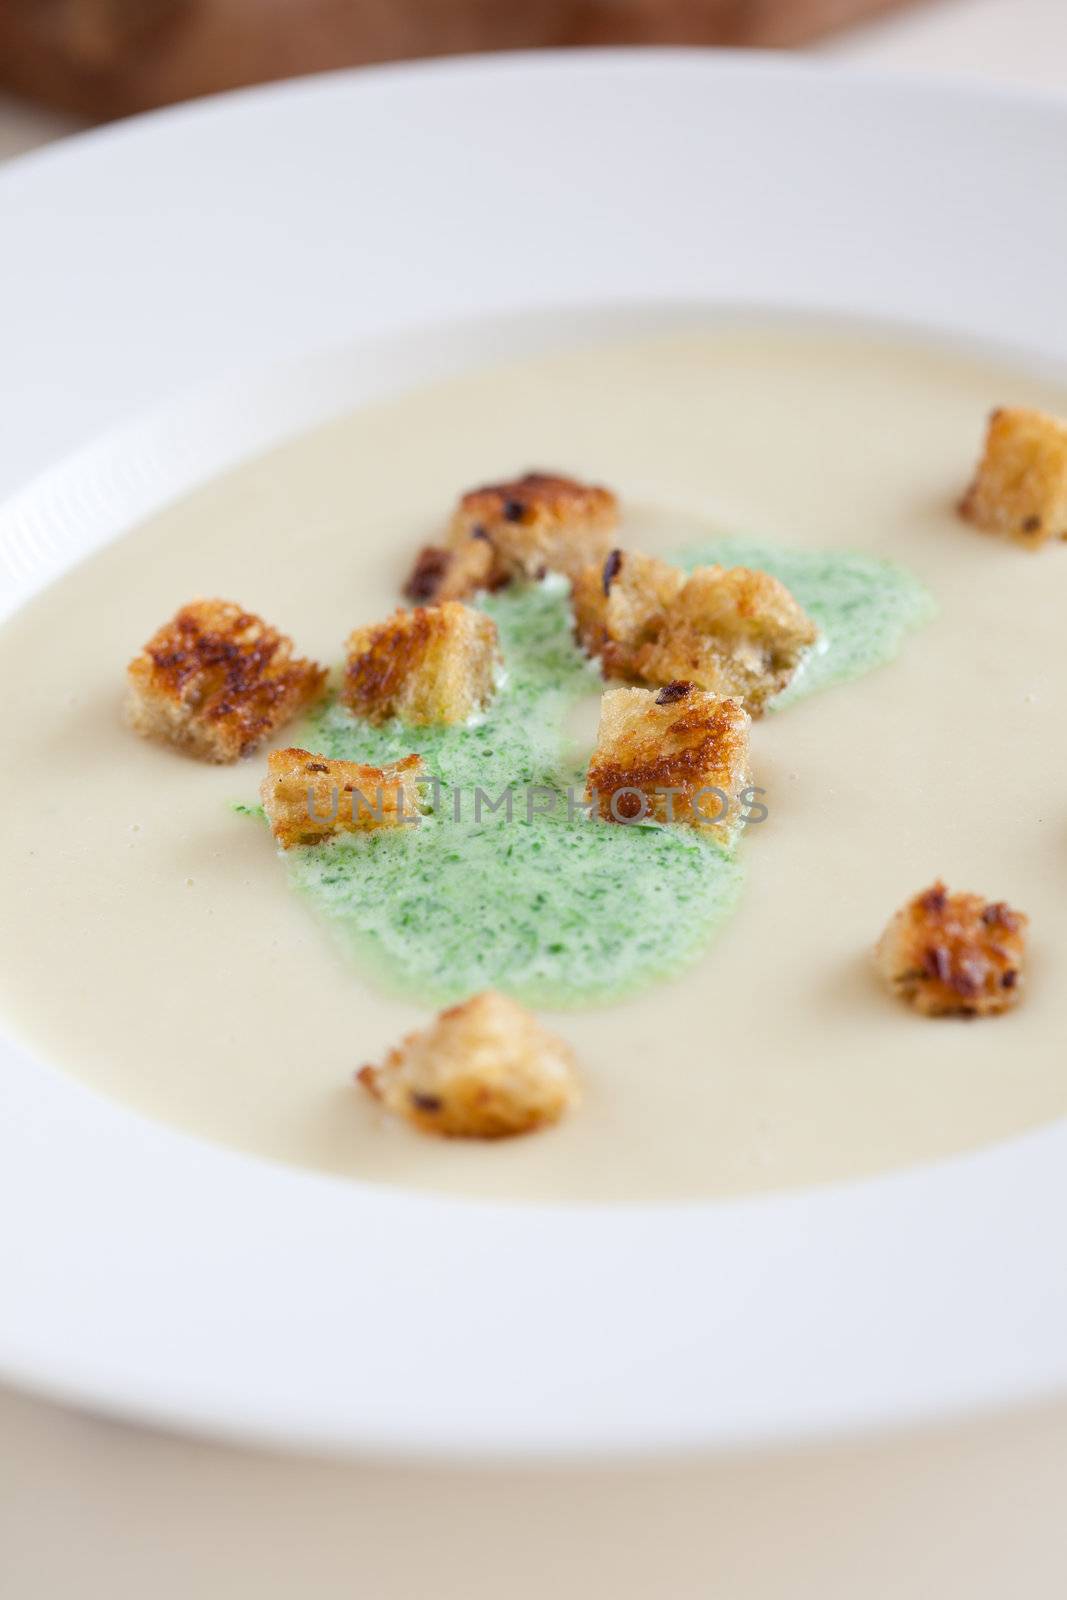 Delicious parsnip soup with parsley cream and croutons